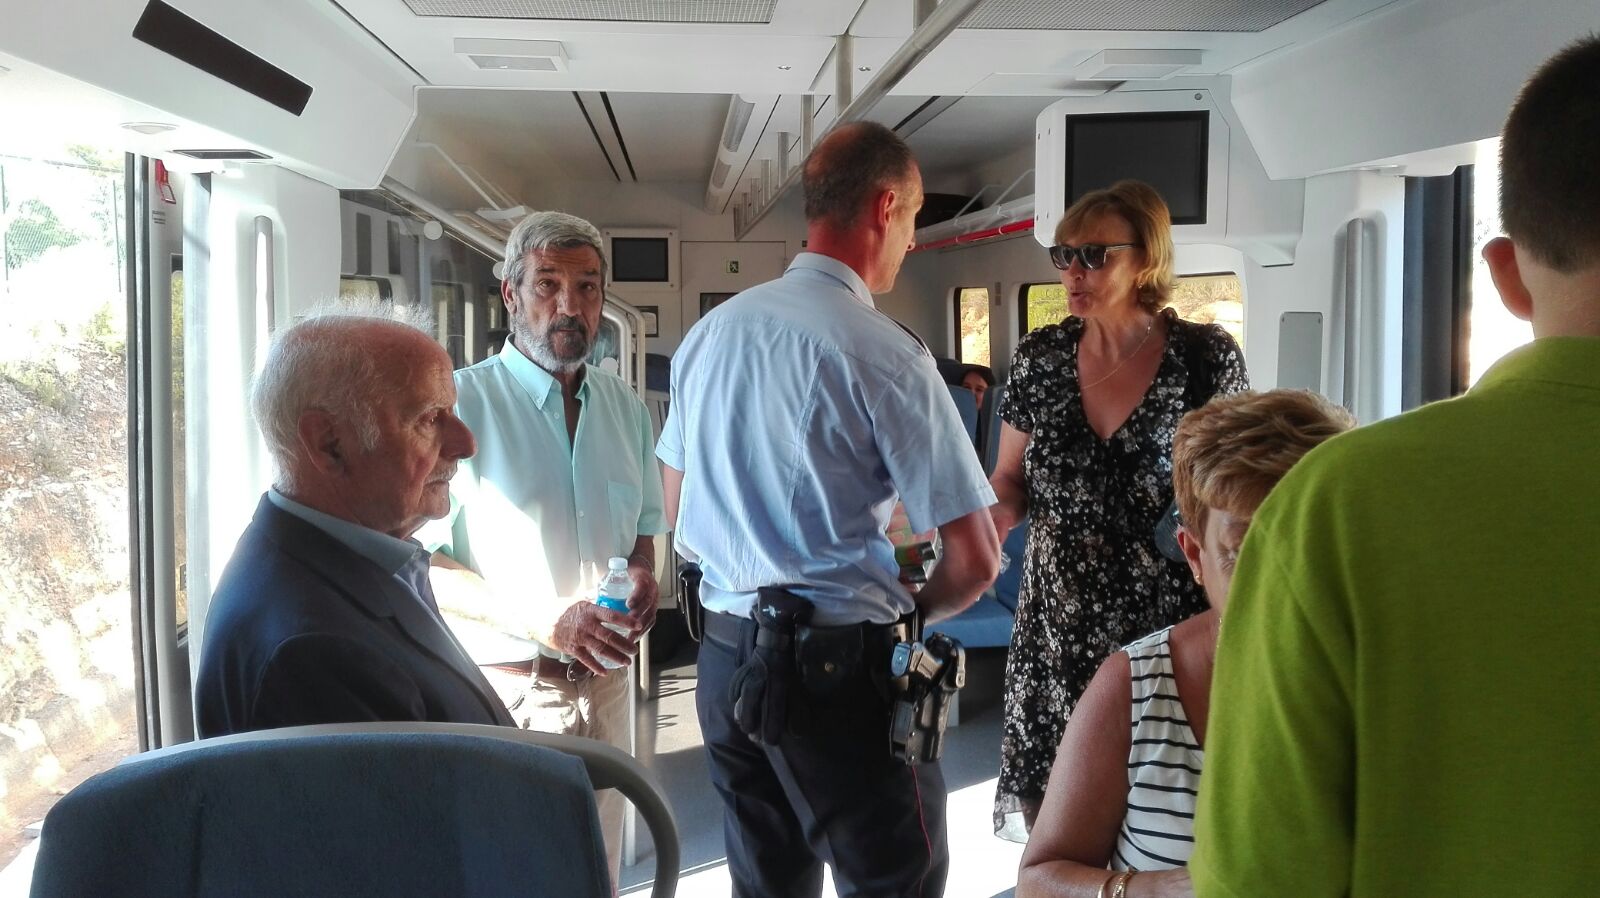 Police officer addressing the passengers inside a train (by ACN)